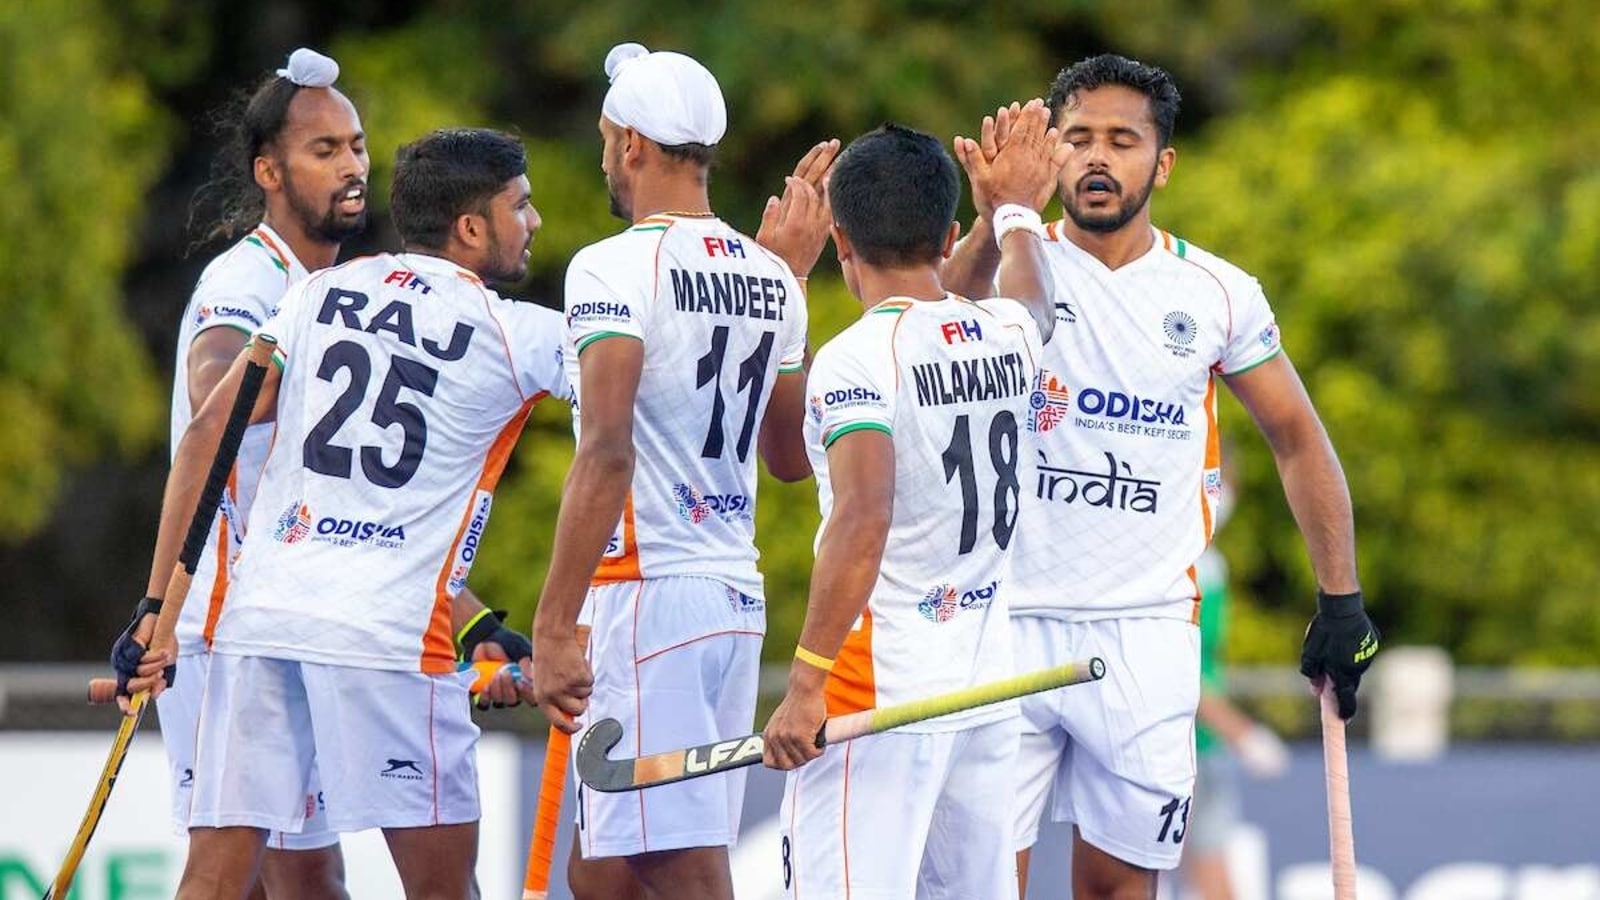 Indian men's hockey team leaves for Argentina to play FIH Pro